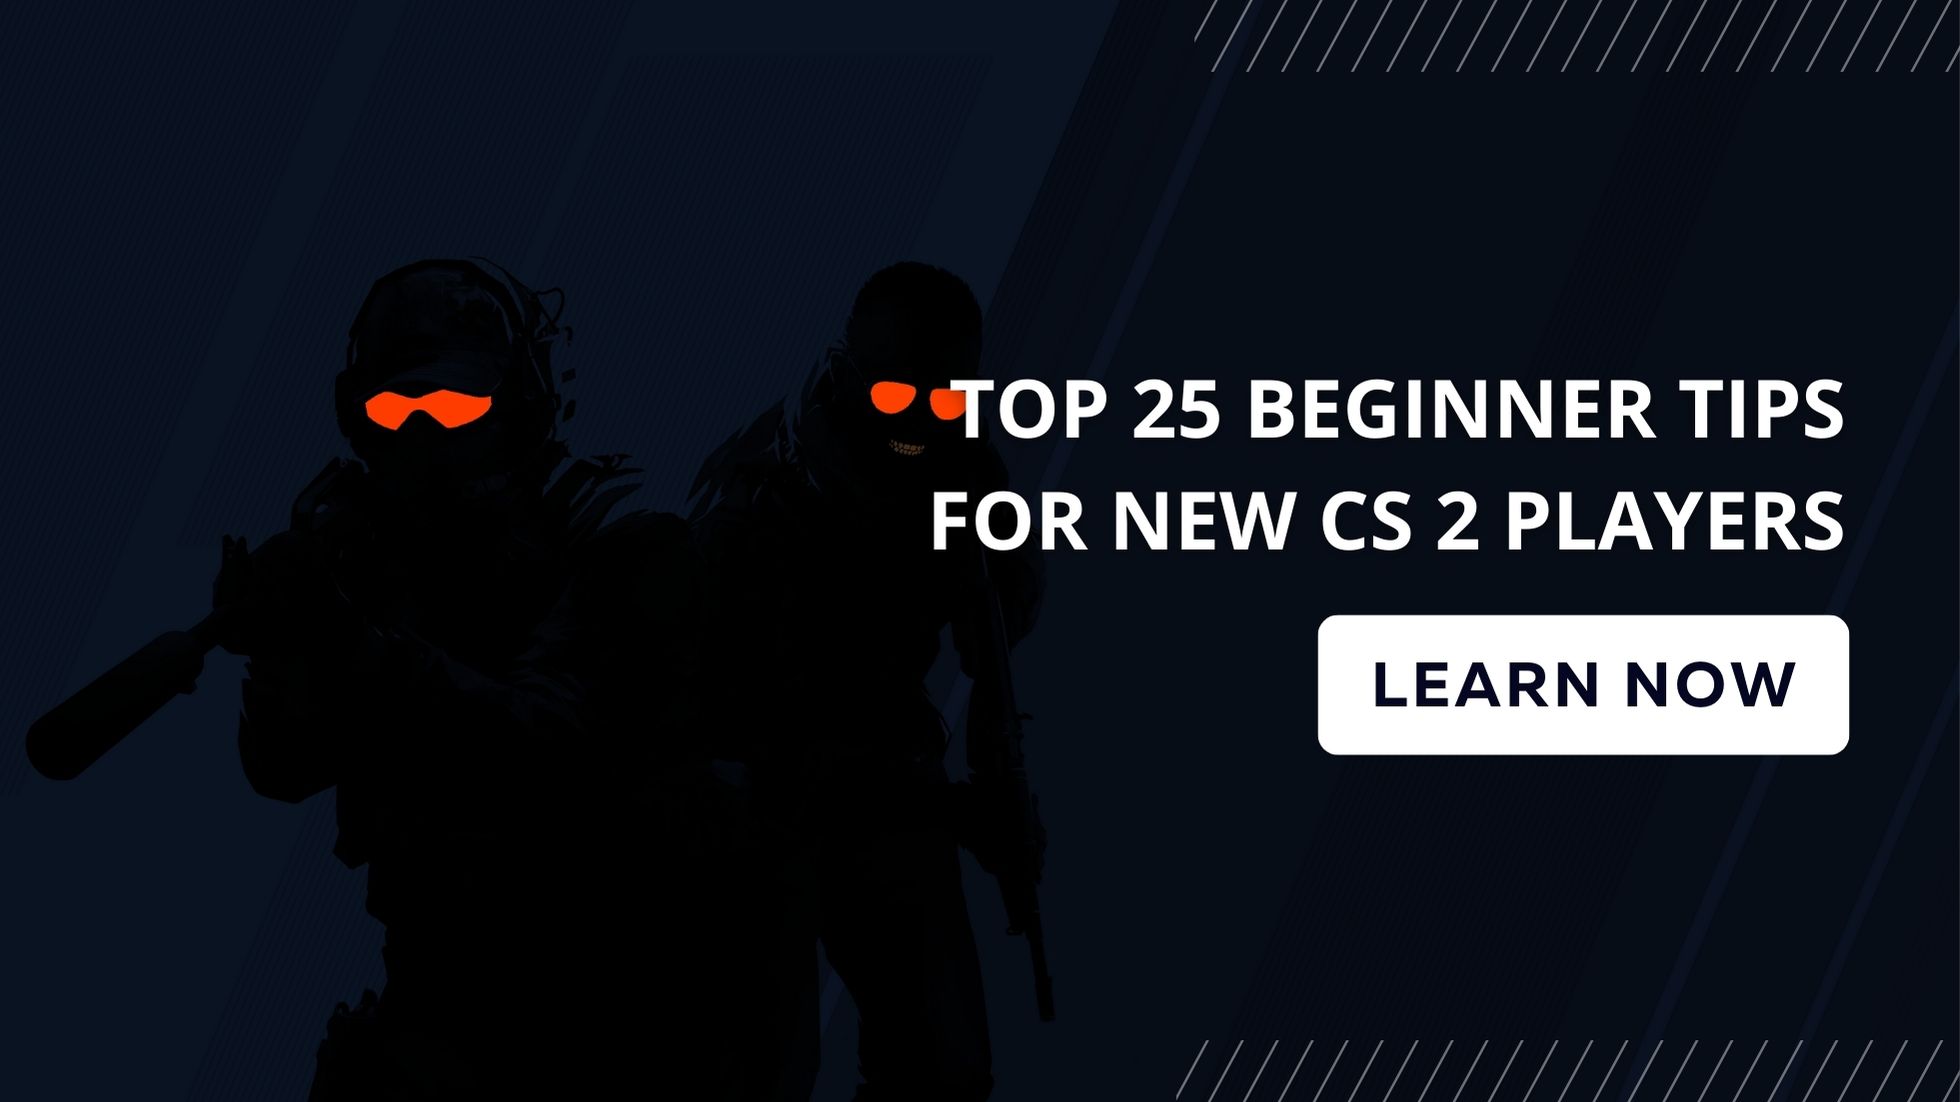 Counter-Strike 2 Beginner's Guide: How to Get Better at CS2